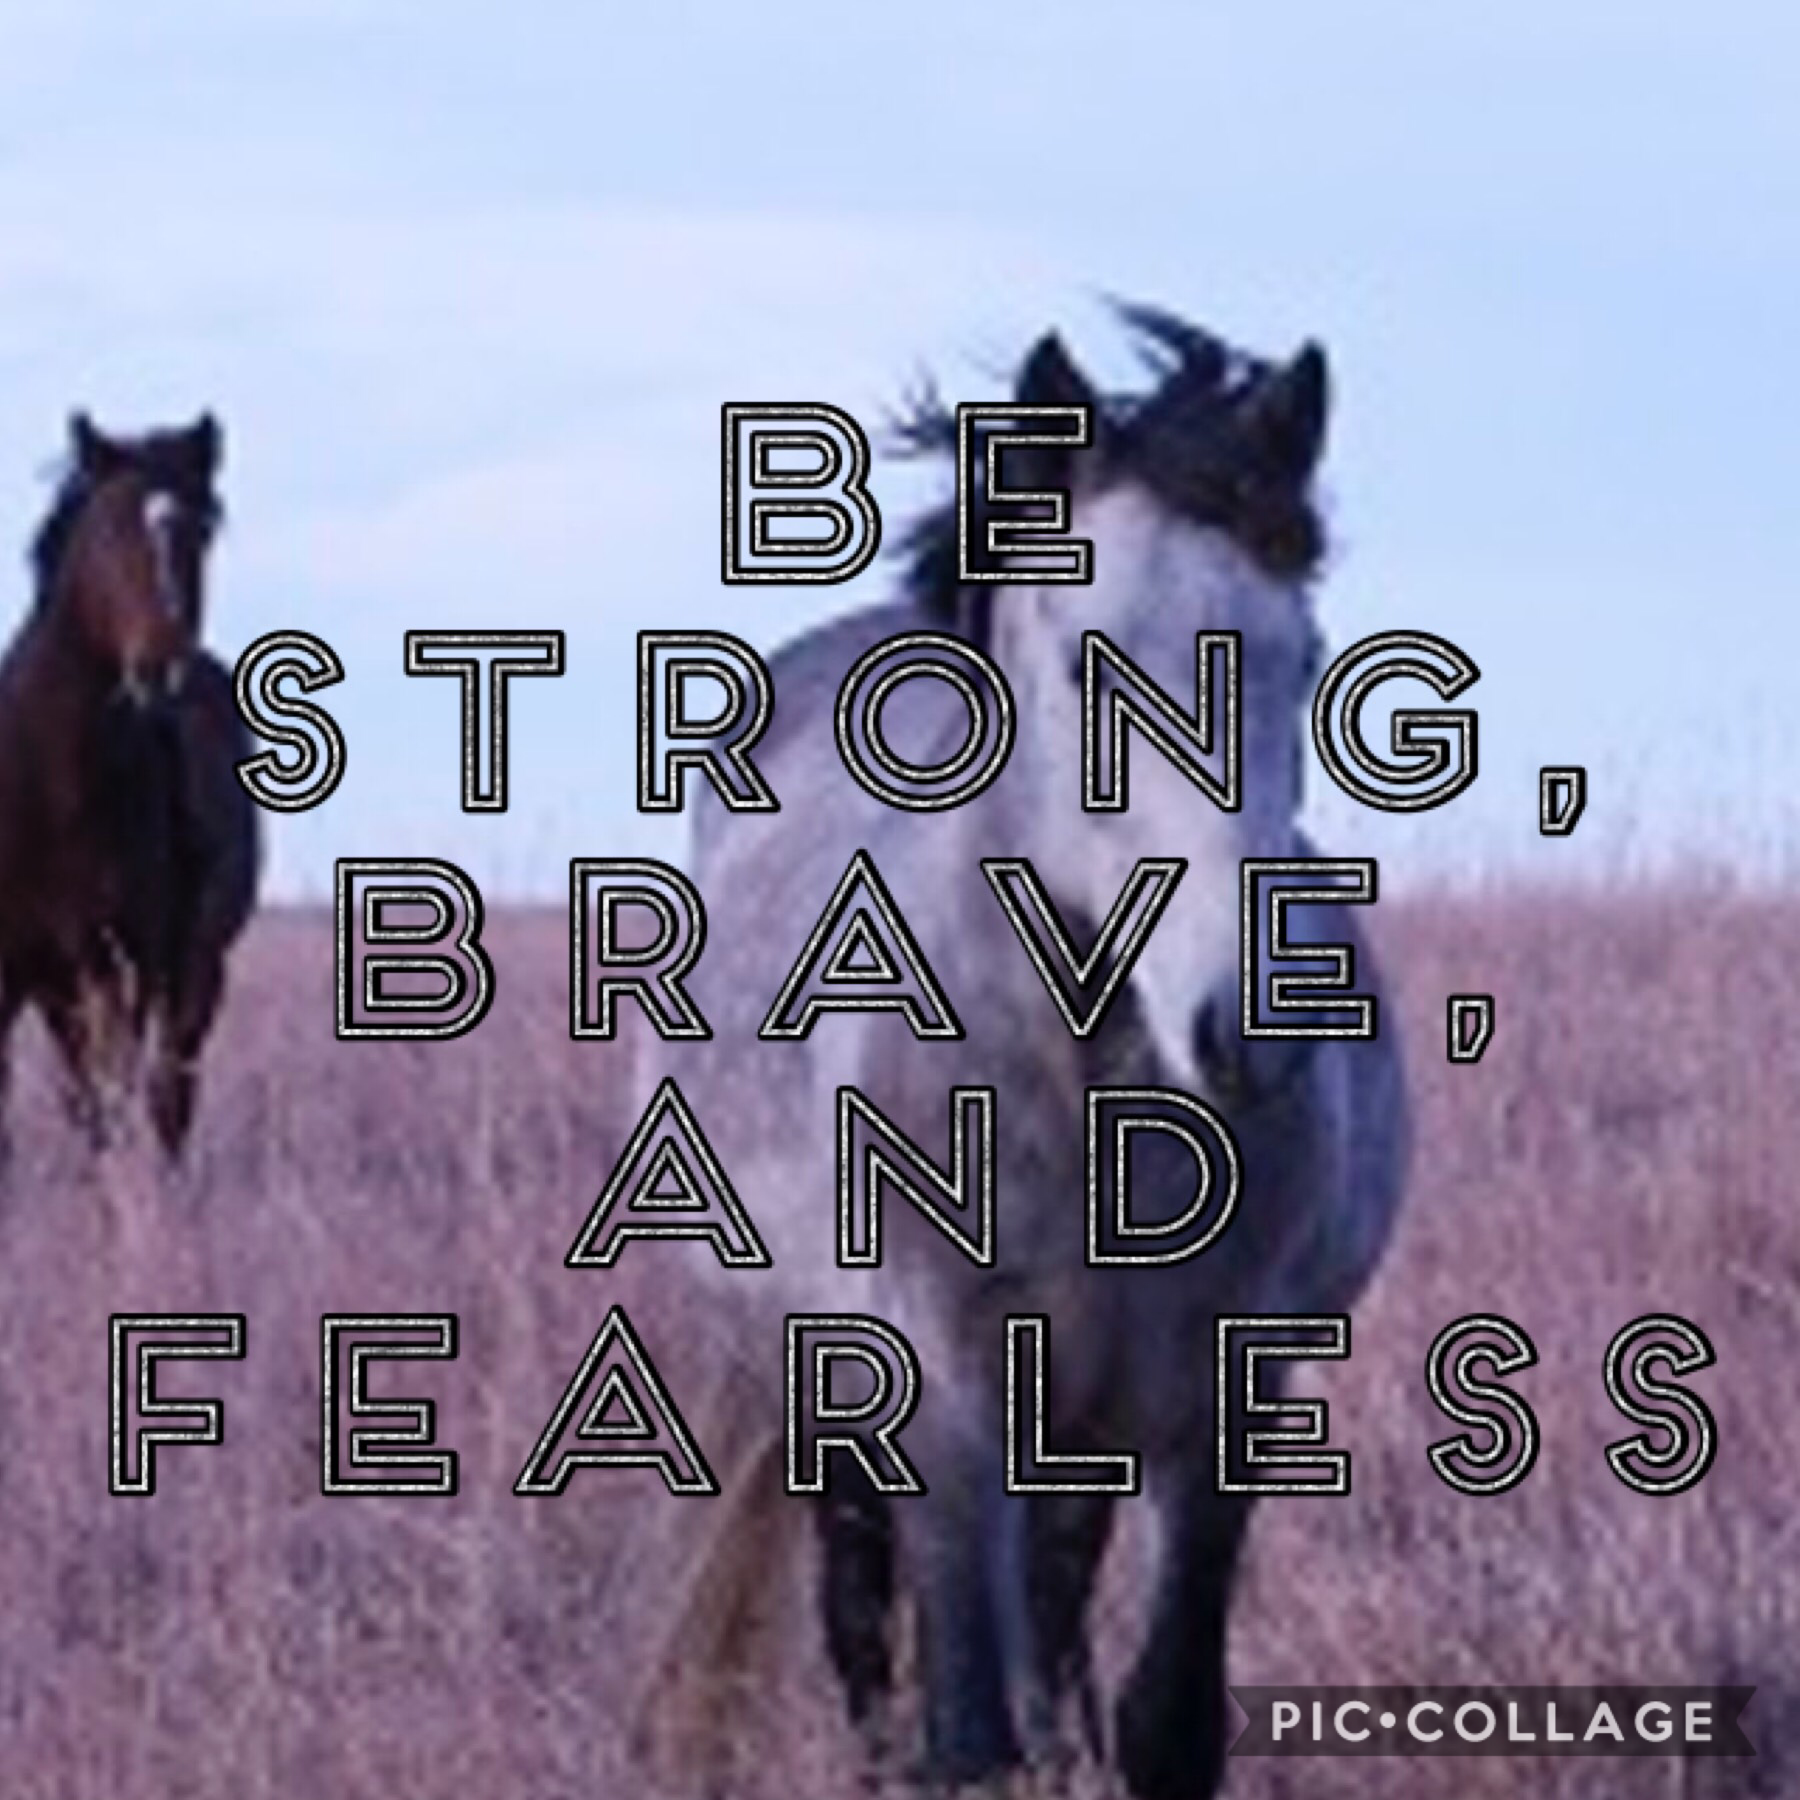 Be strong brave and fearless